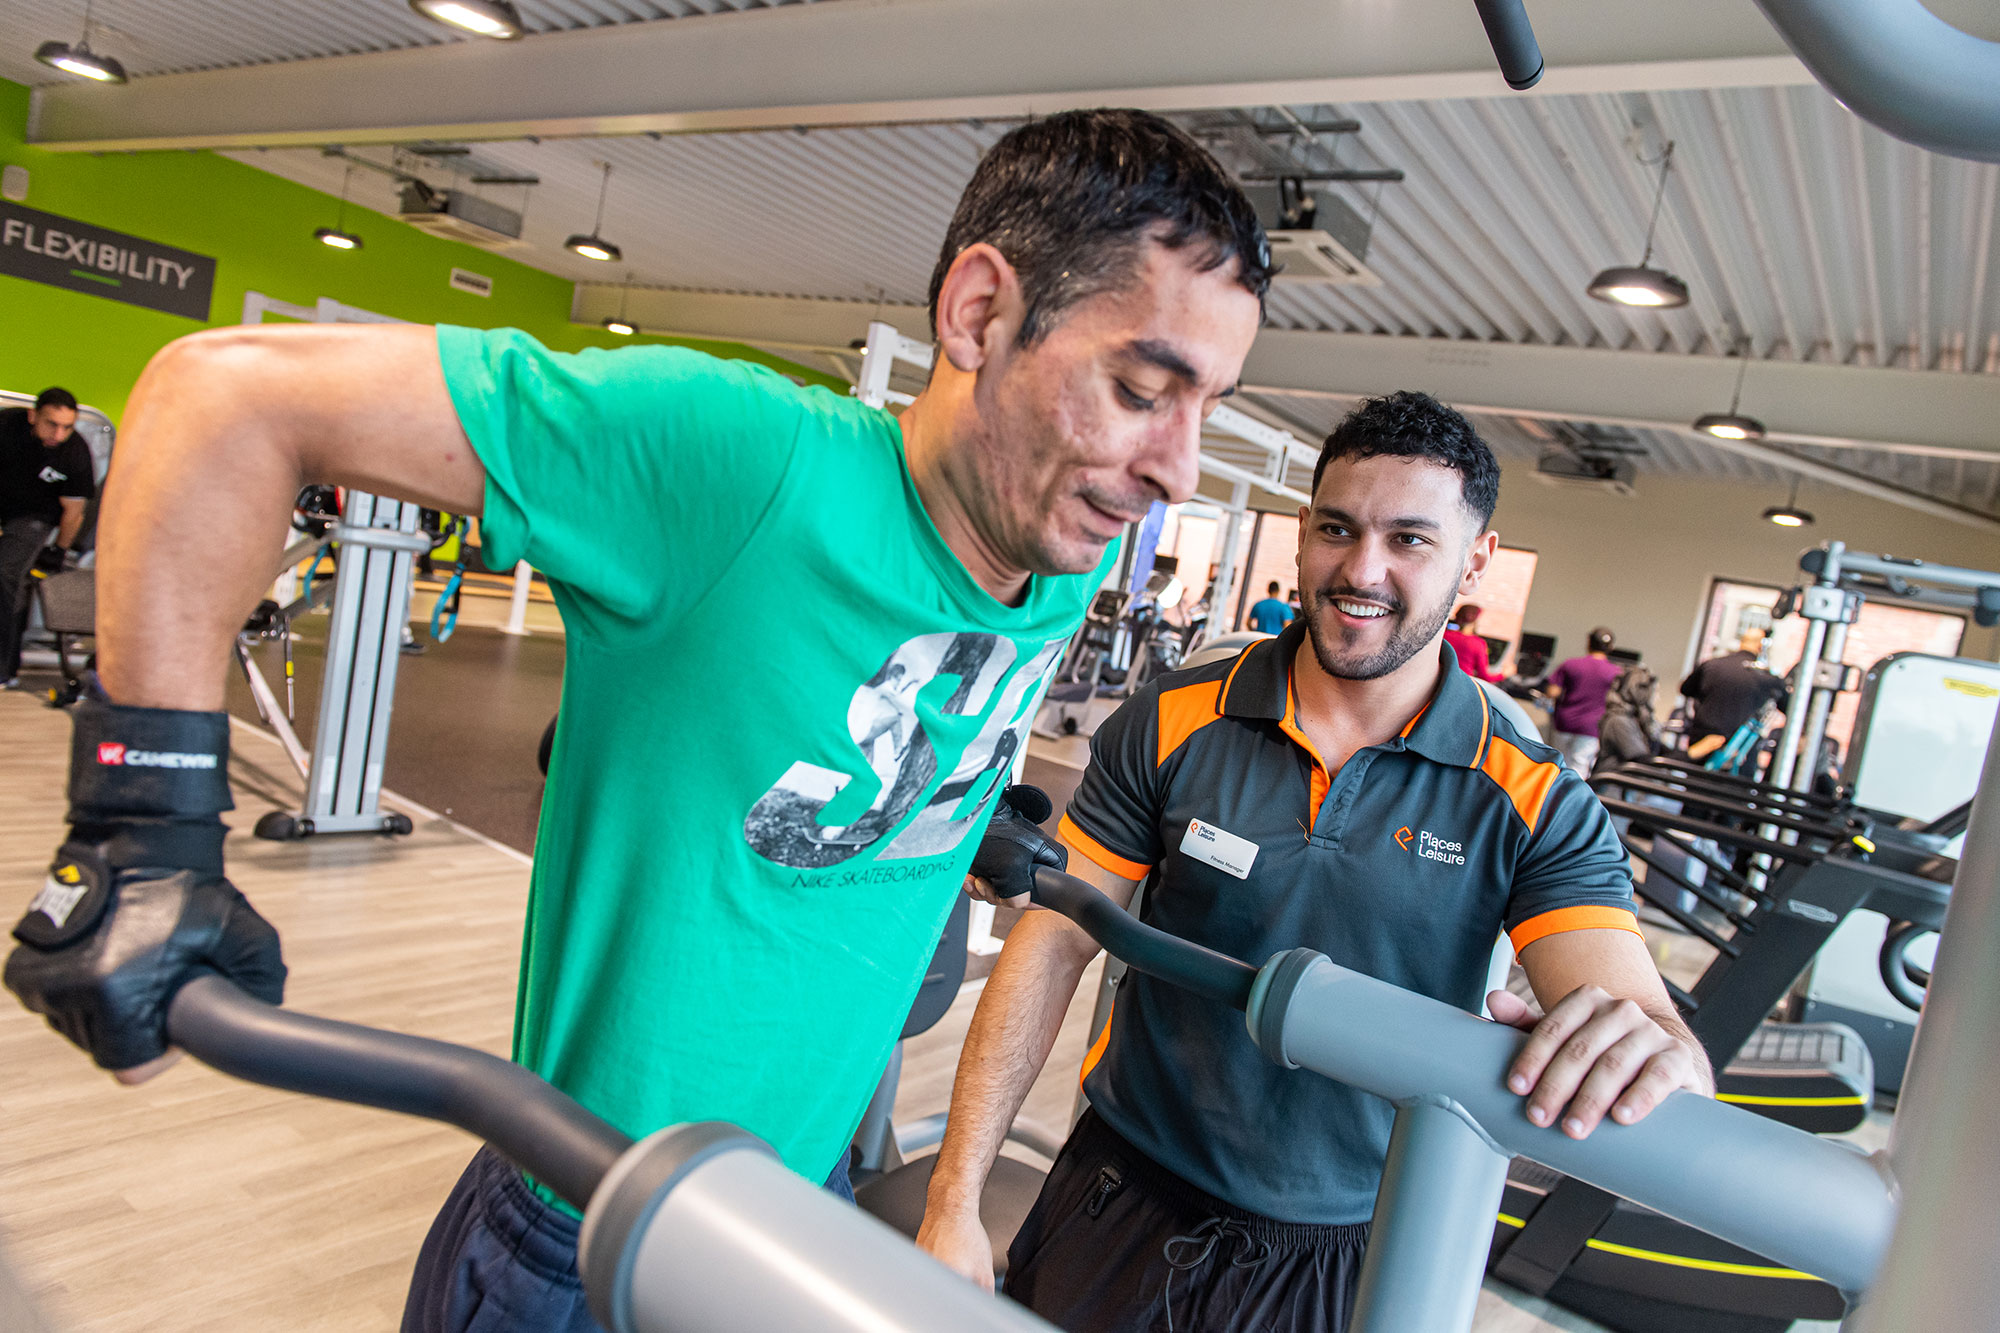 Places Leisure’s COVID-19 and Long-COVID rehab programme launched across England